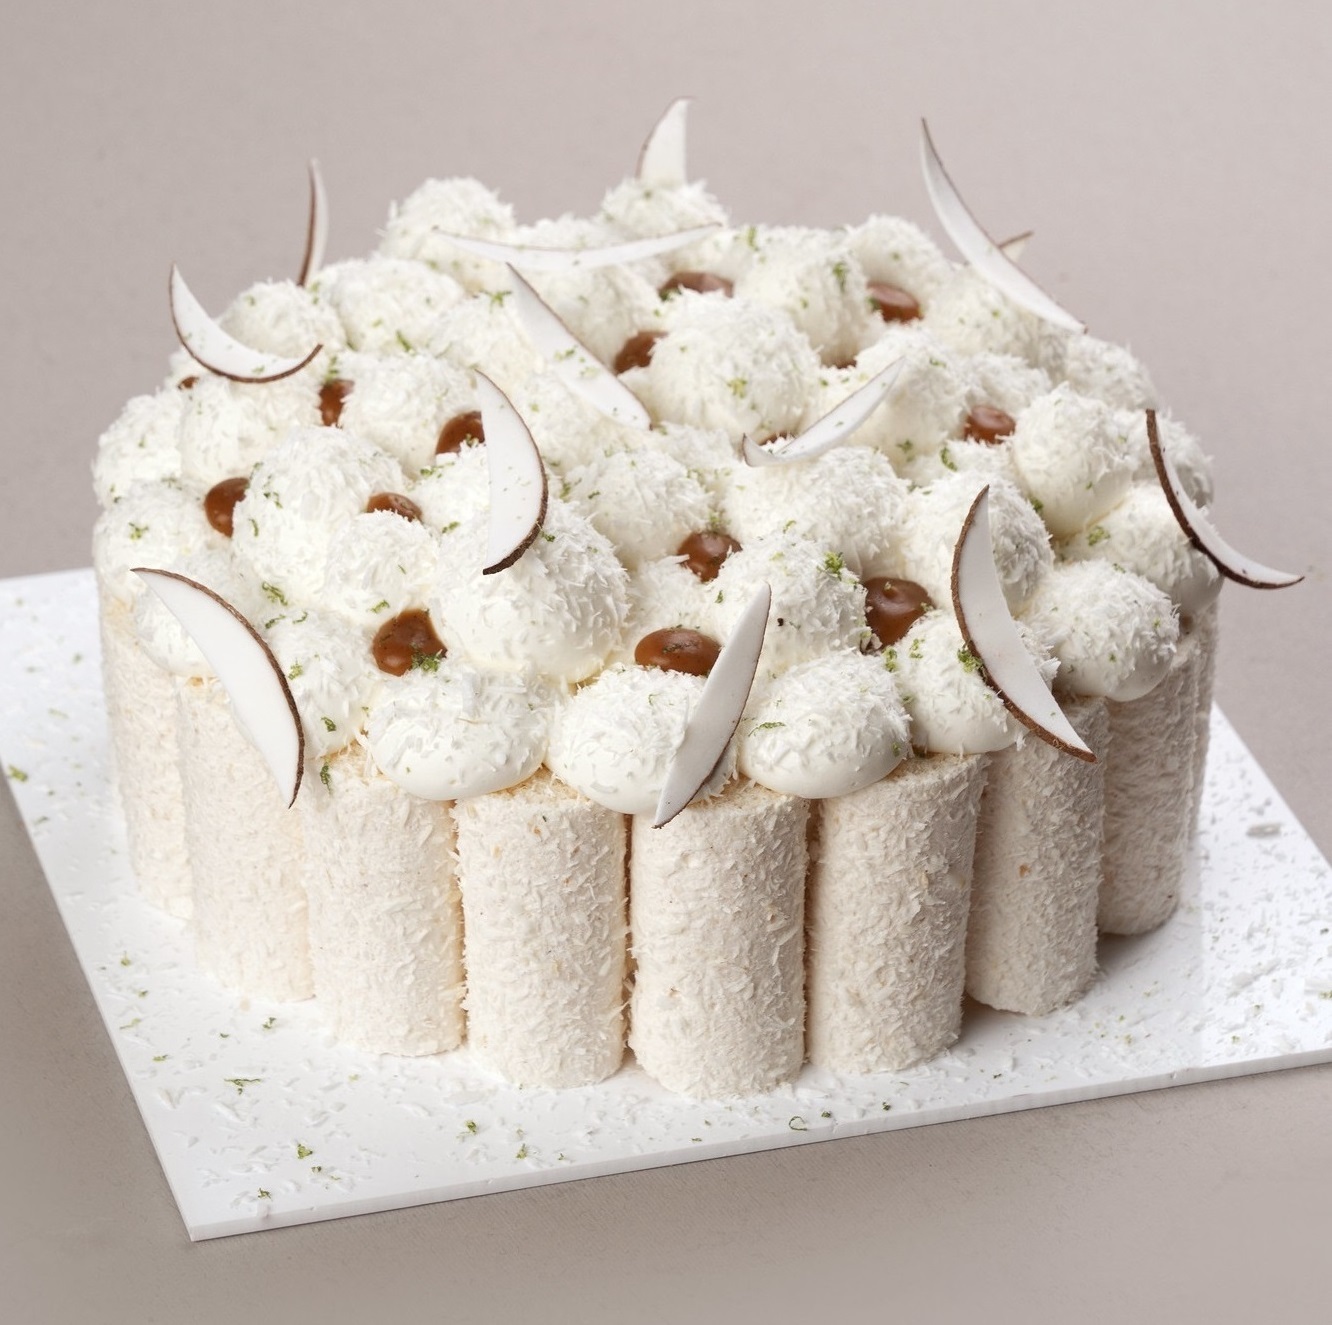 Coconut Caramel and Lime cake